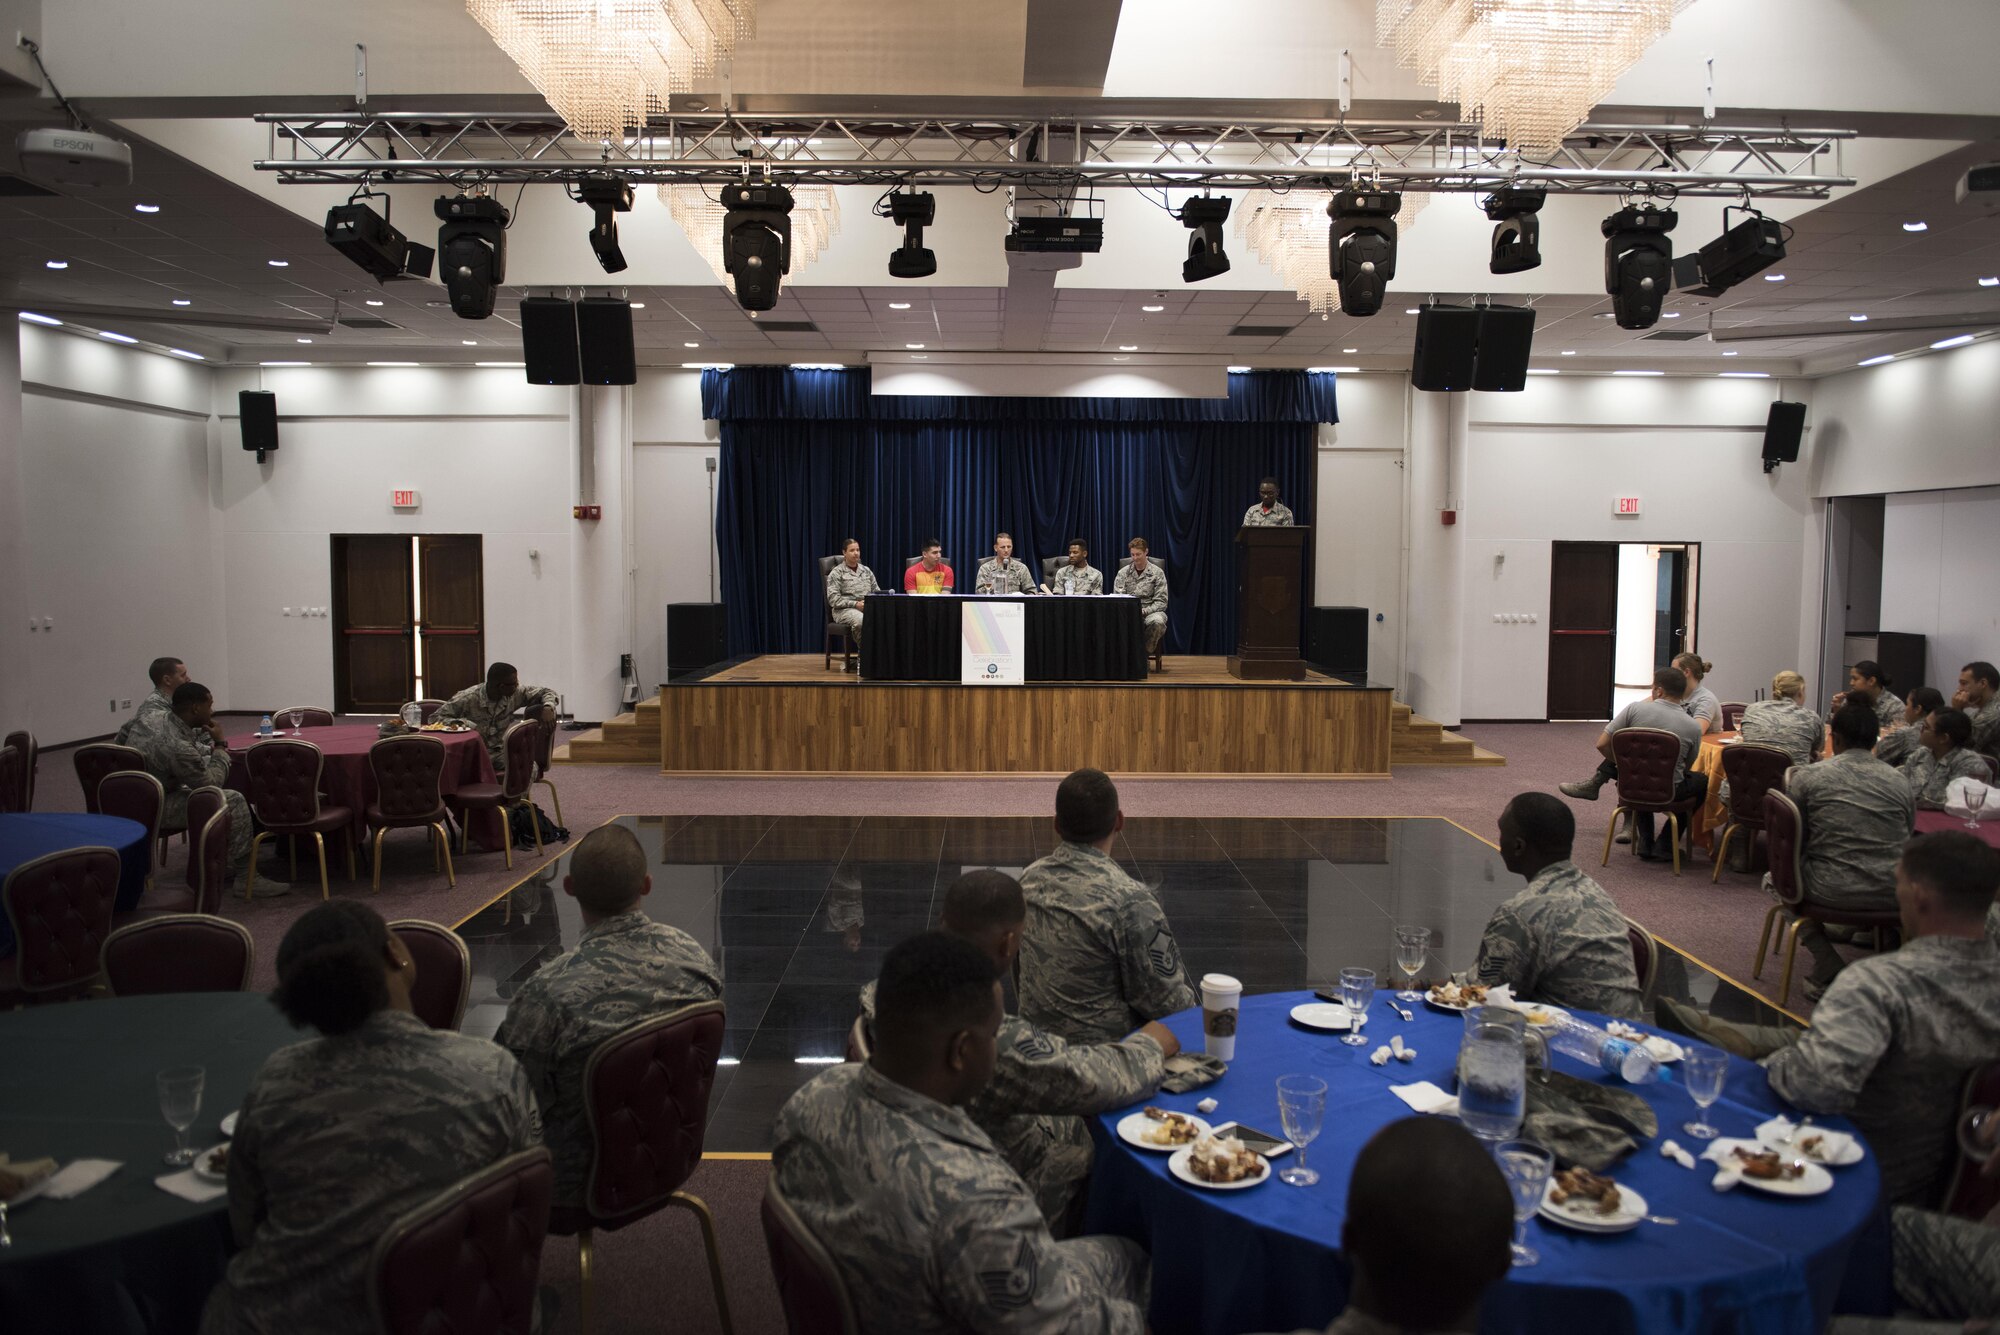 The Incirlik Lesbian, Gay, Bisexual and Transgender committee participate in a lunch and learn panel as part of LGBT Pride Month June 16, 2017, at Incirlik Air Base, Turkey. The panel featured five Airmen who answered questions pertaining to LGBT service members. (U.S. Air Force photo by Airman 1st Class Kristan Campbell)